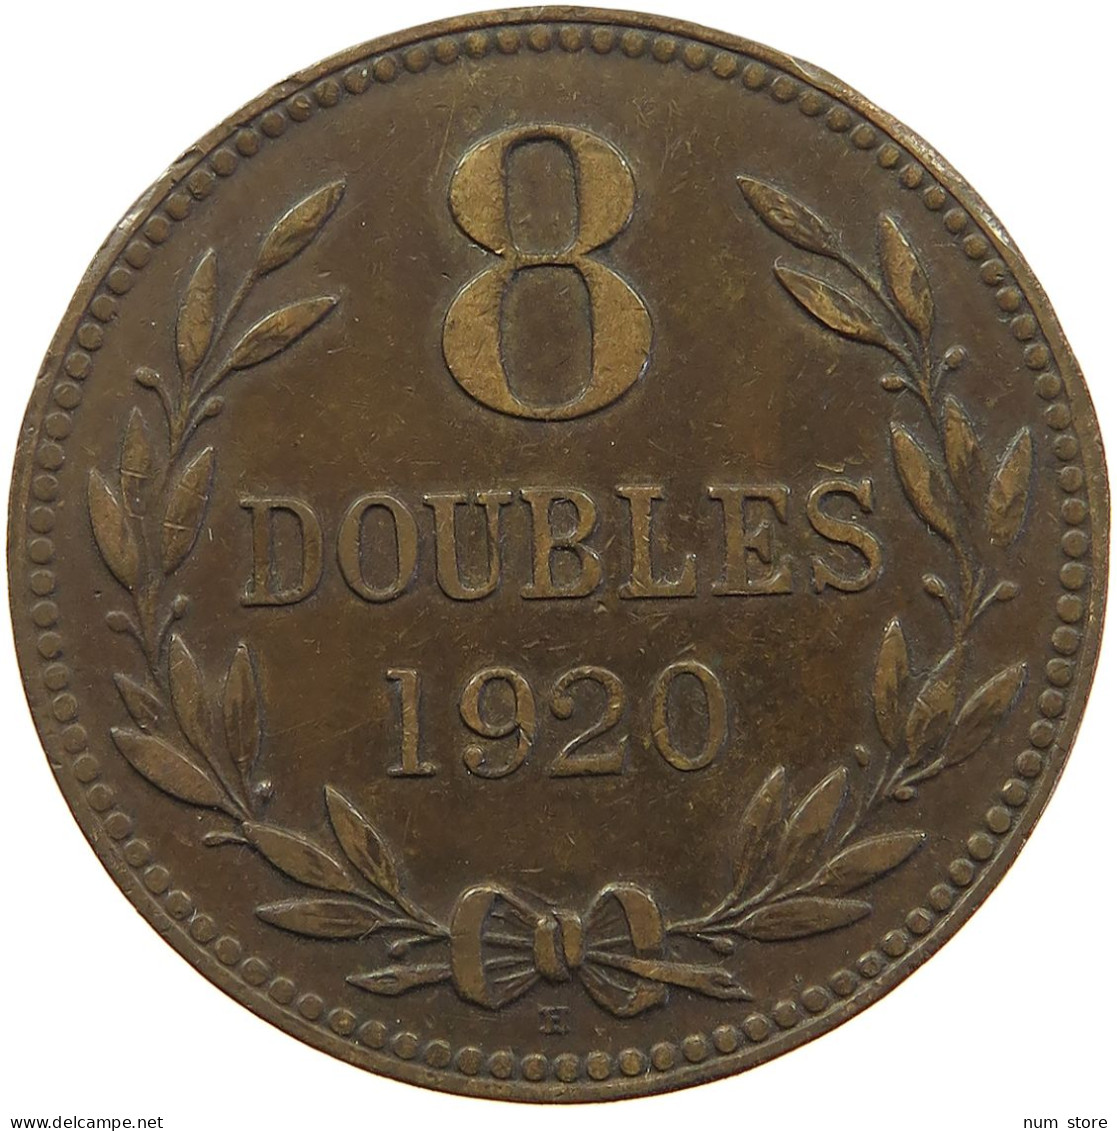 GUERNSEY 8 DOUBLES 1920 George V. (1910-1936) #s029 0311 - Guernsey